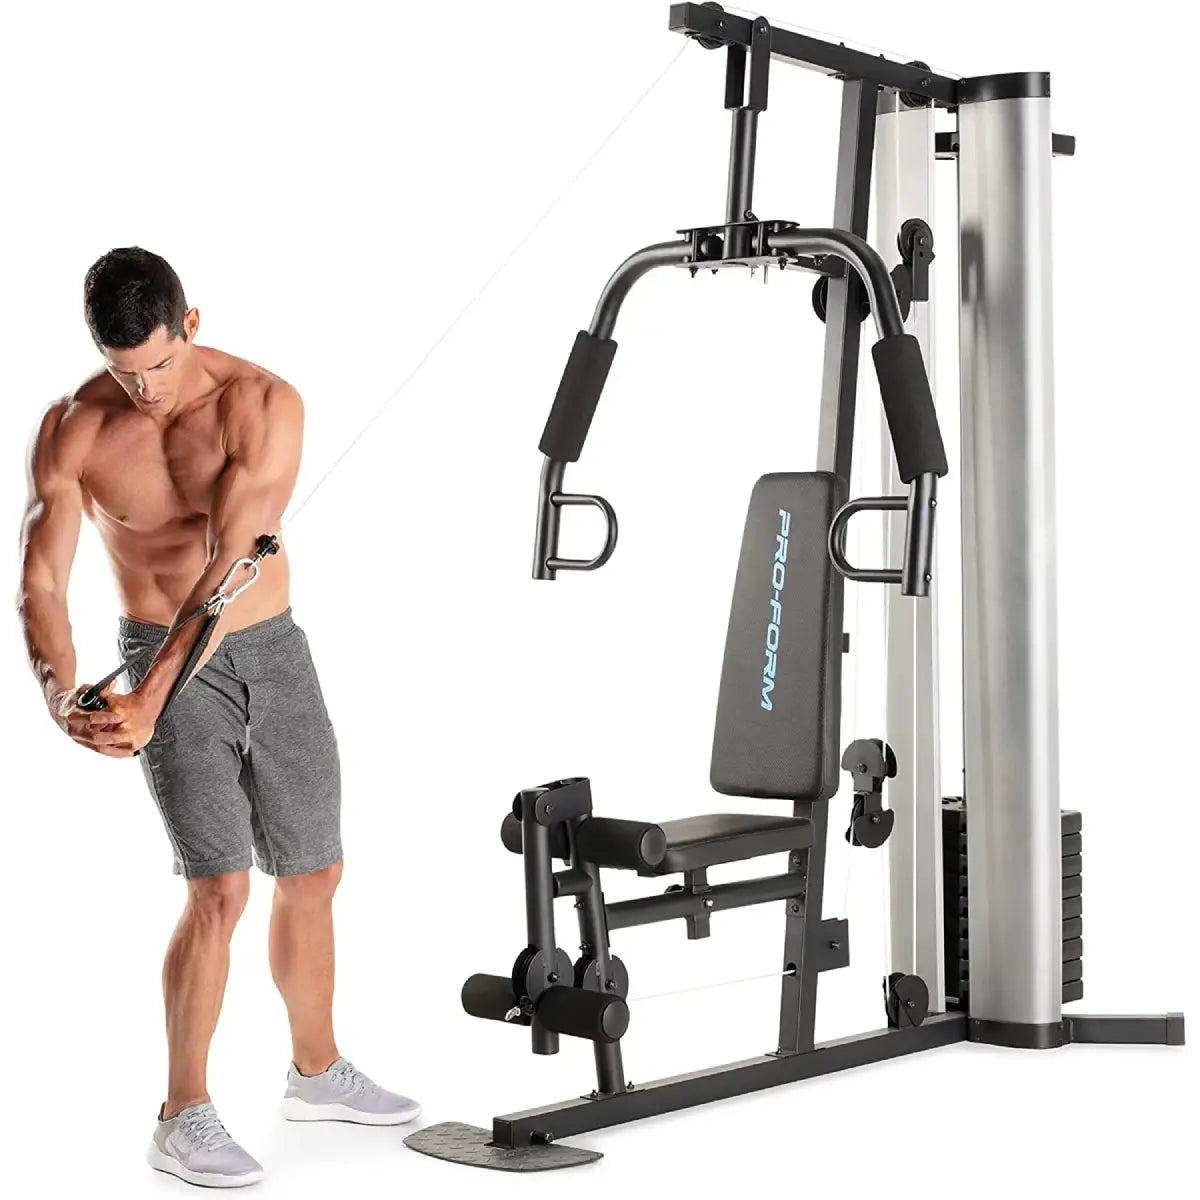 I Bought The Best Home Gym Equipment! (Fit! Home Gym Review) 